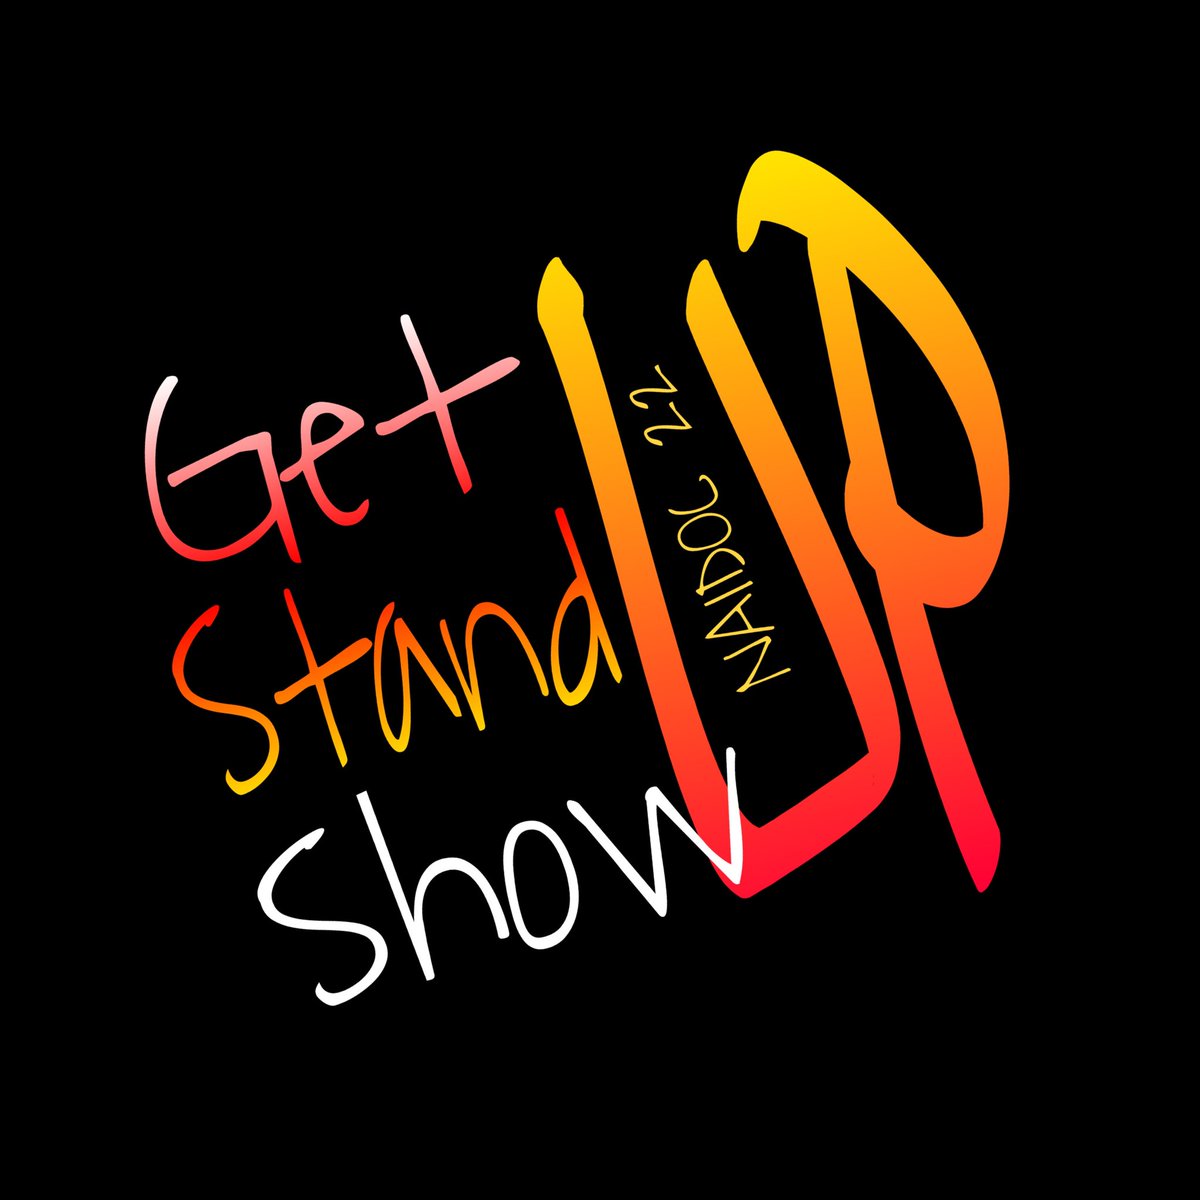 #GetUpStandUpShowUp
I'm showing my unconditional  support for our First Nations brothers and sisters. Join me! #NAIDOC2022 #VoiceTreatyTruth #Makarrata #auspol #NAIDOCWeek2022 #NAIDOCWeek #NAIDOC